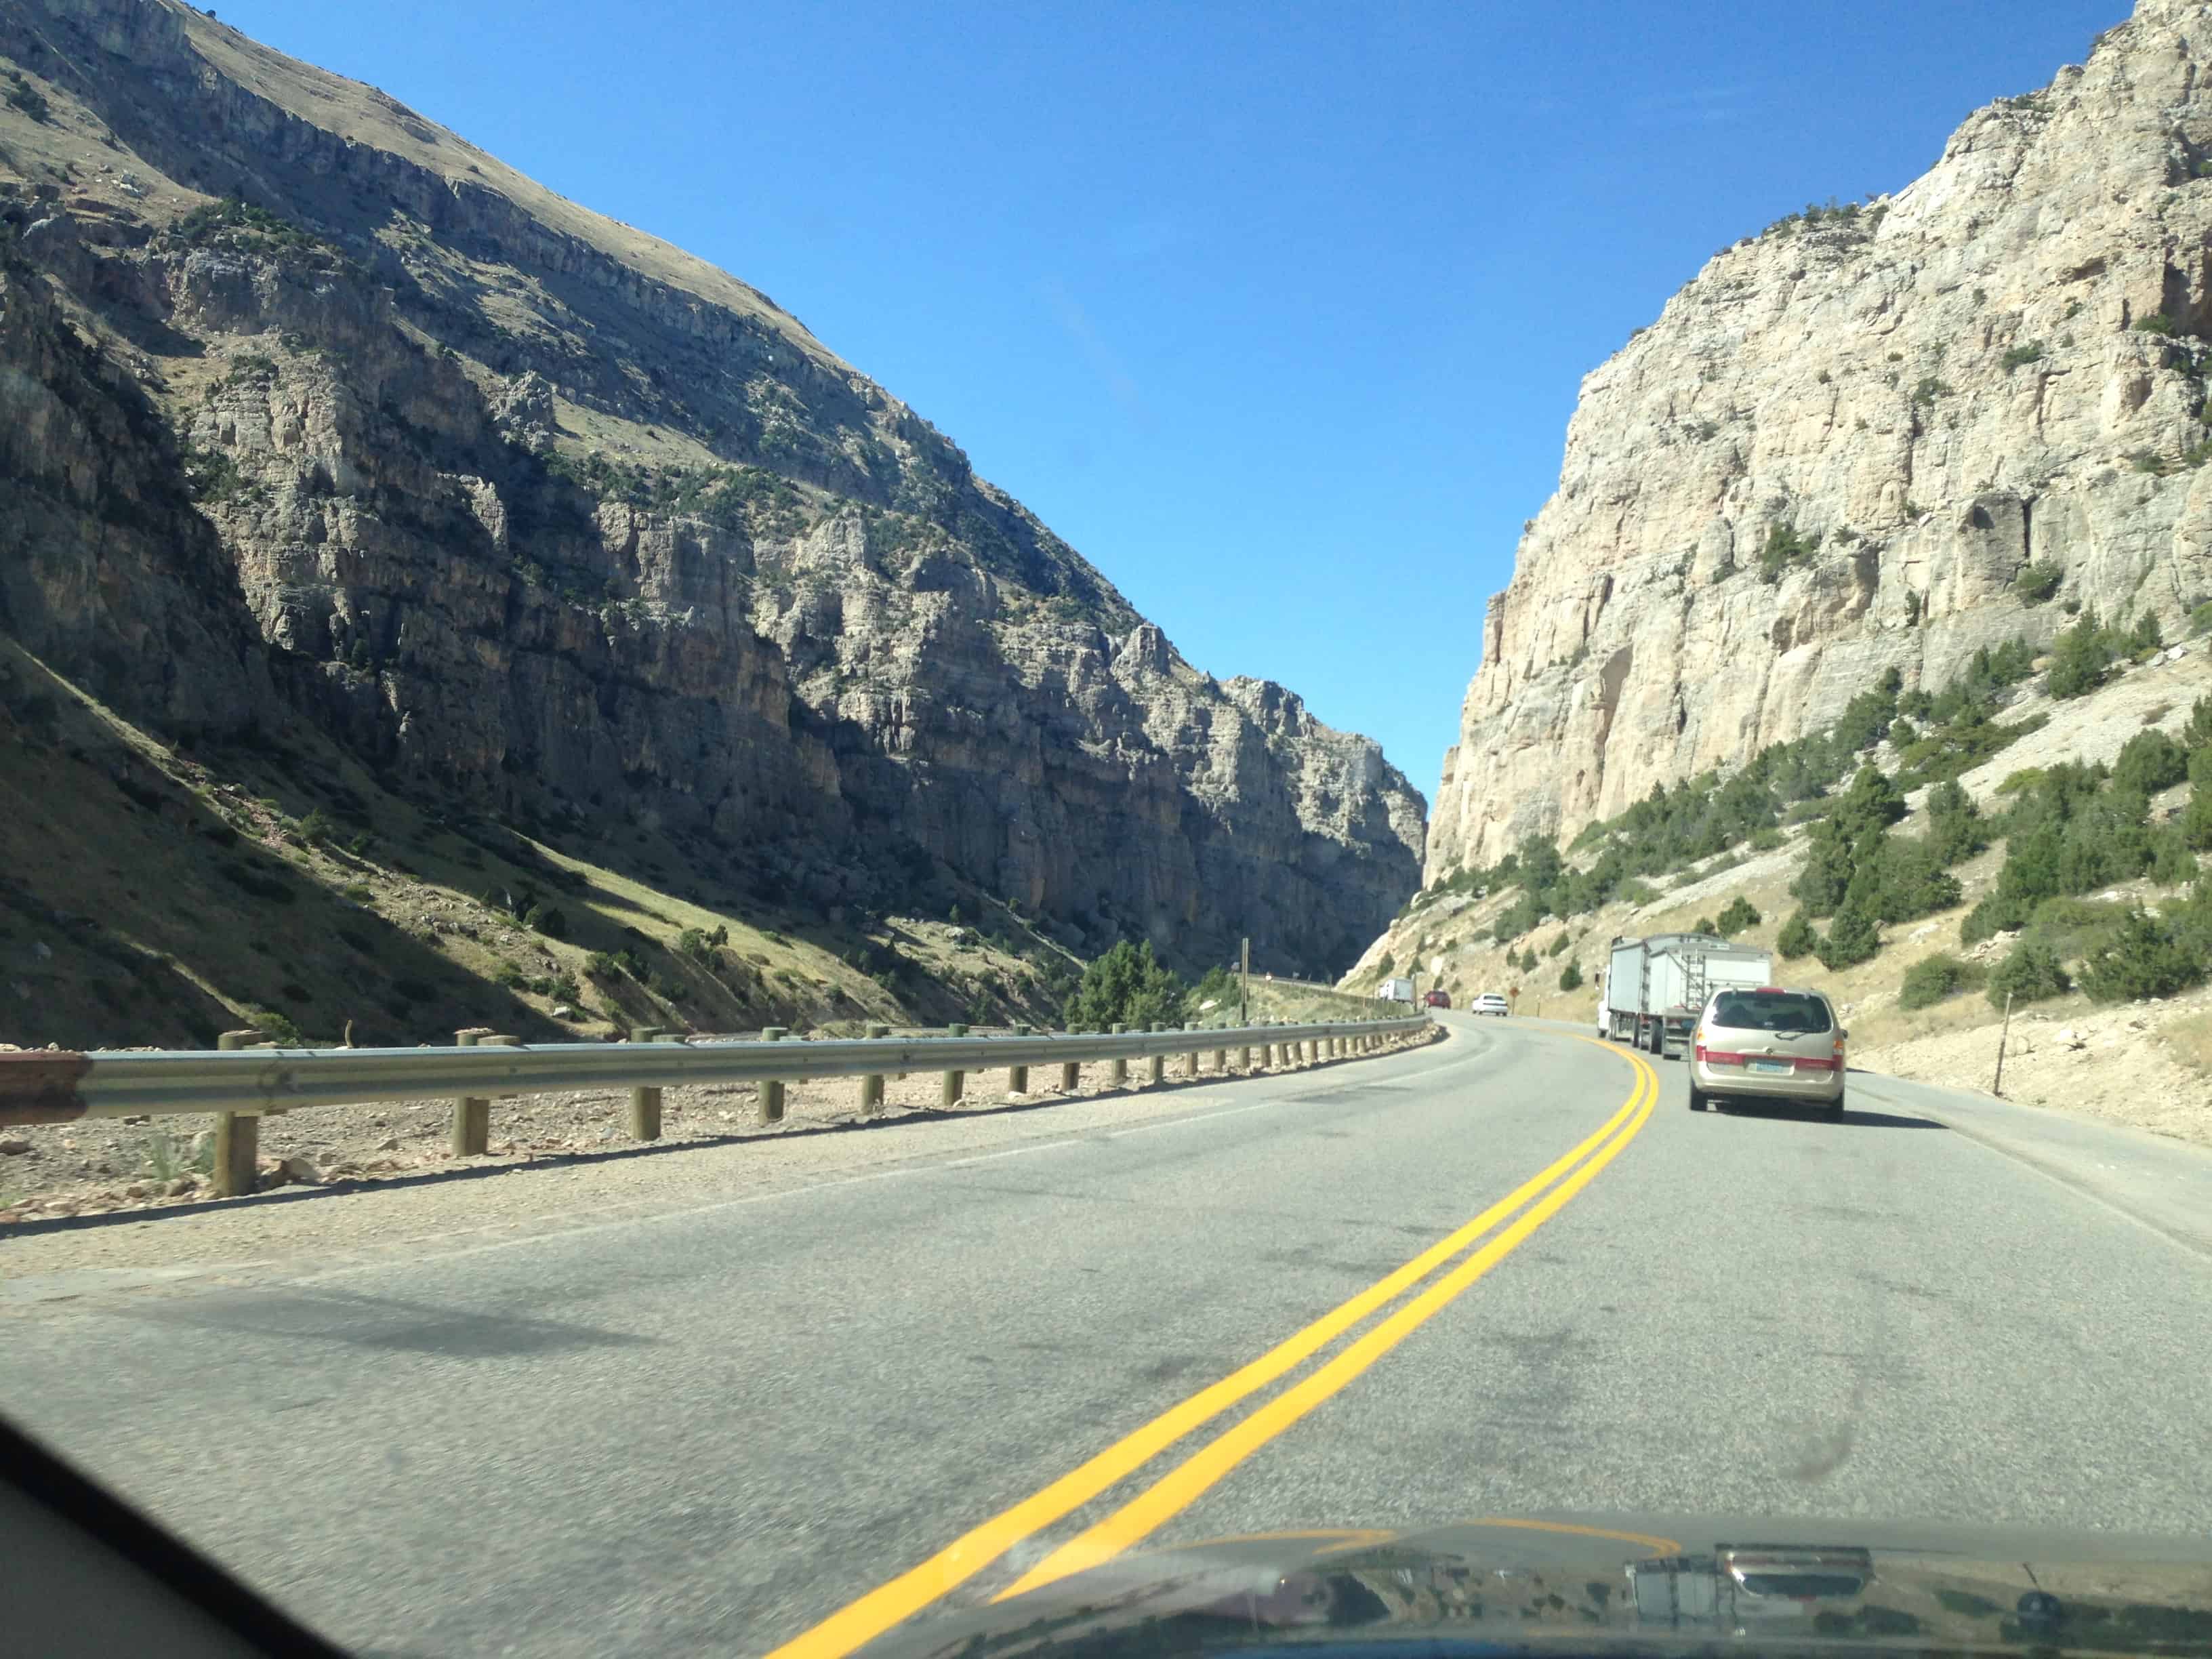 Driving through the Wind River Canyon Scenic Byway in Wyoming